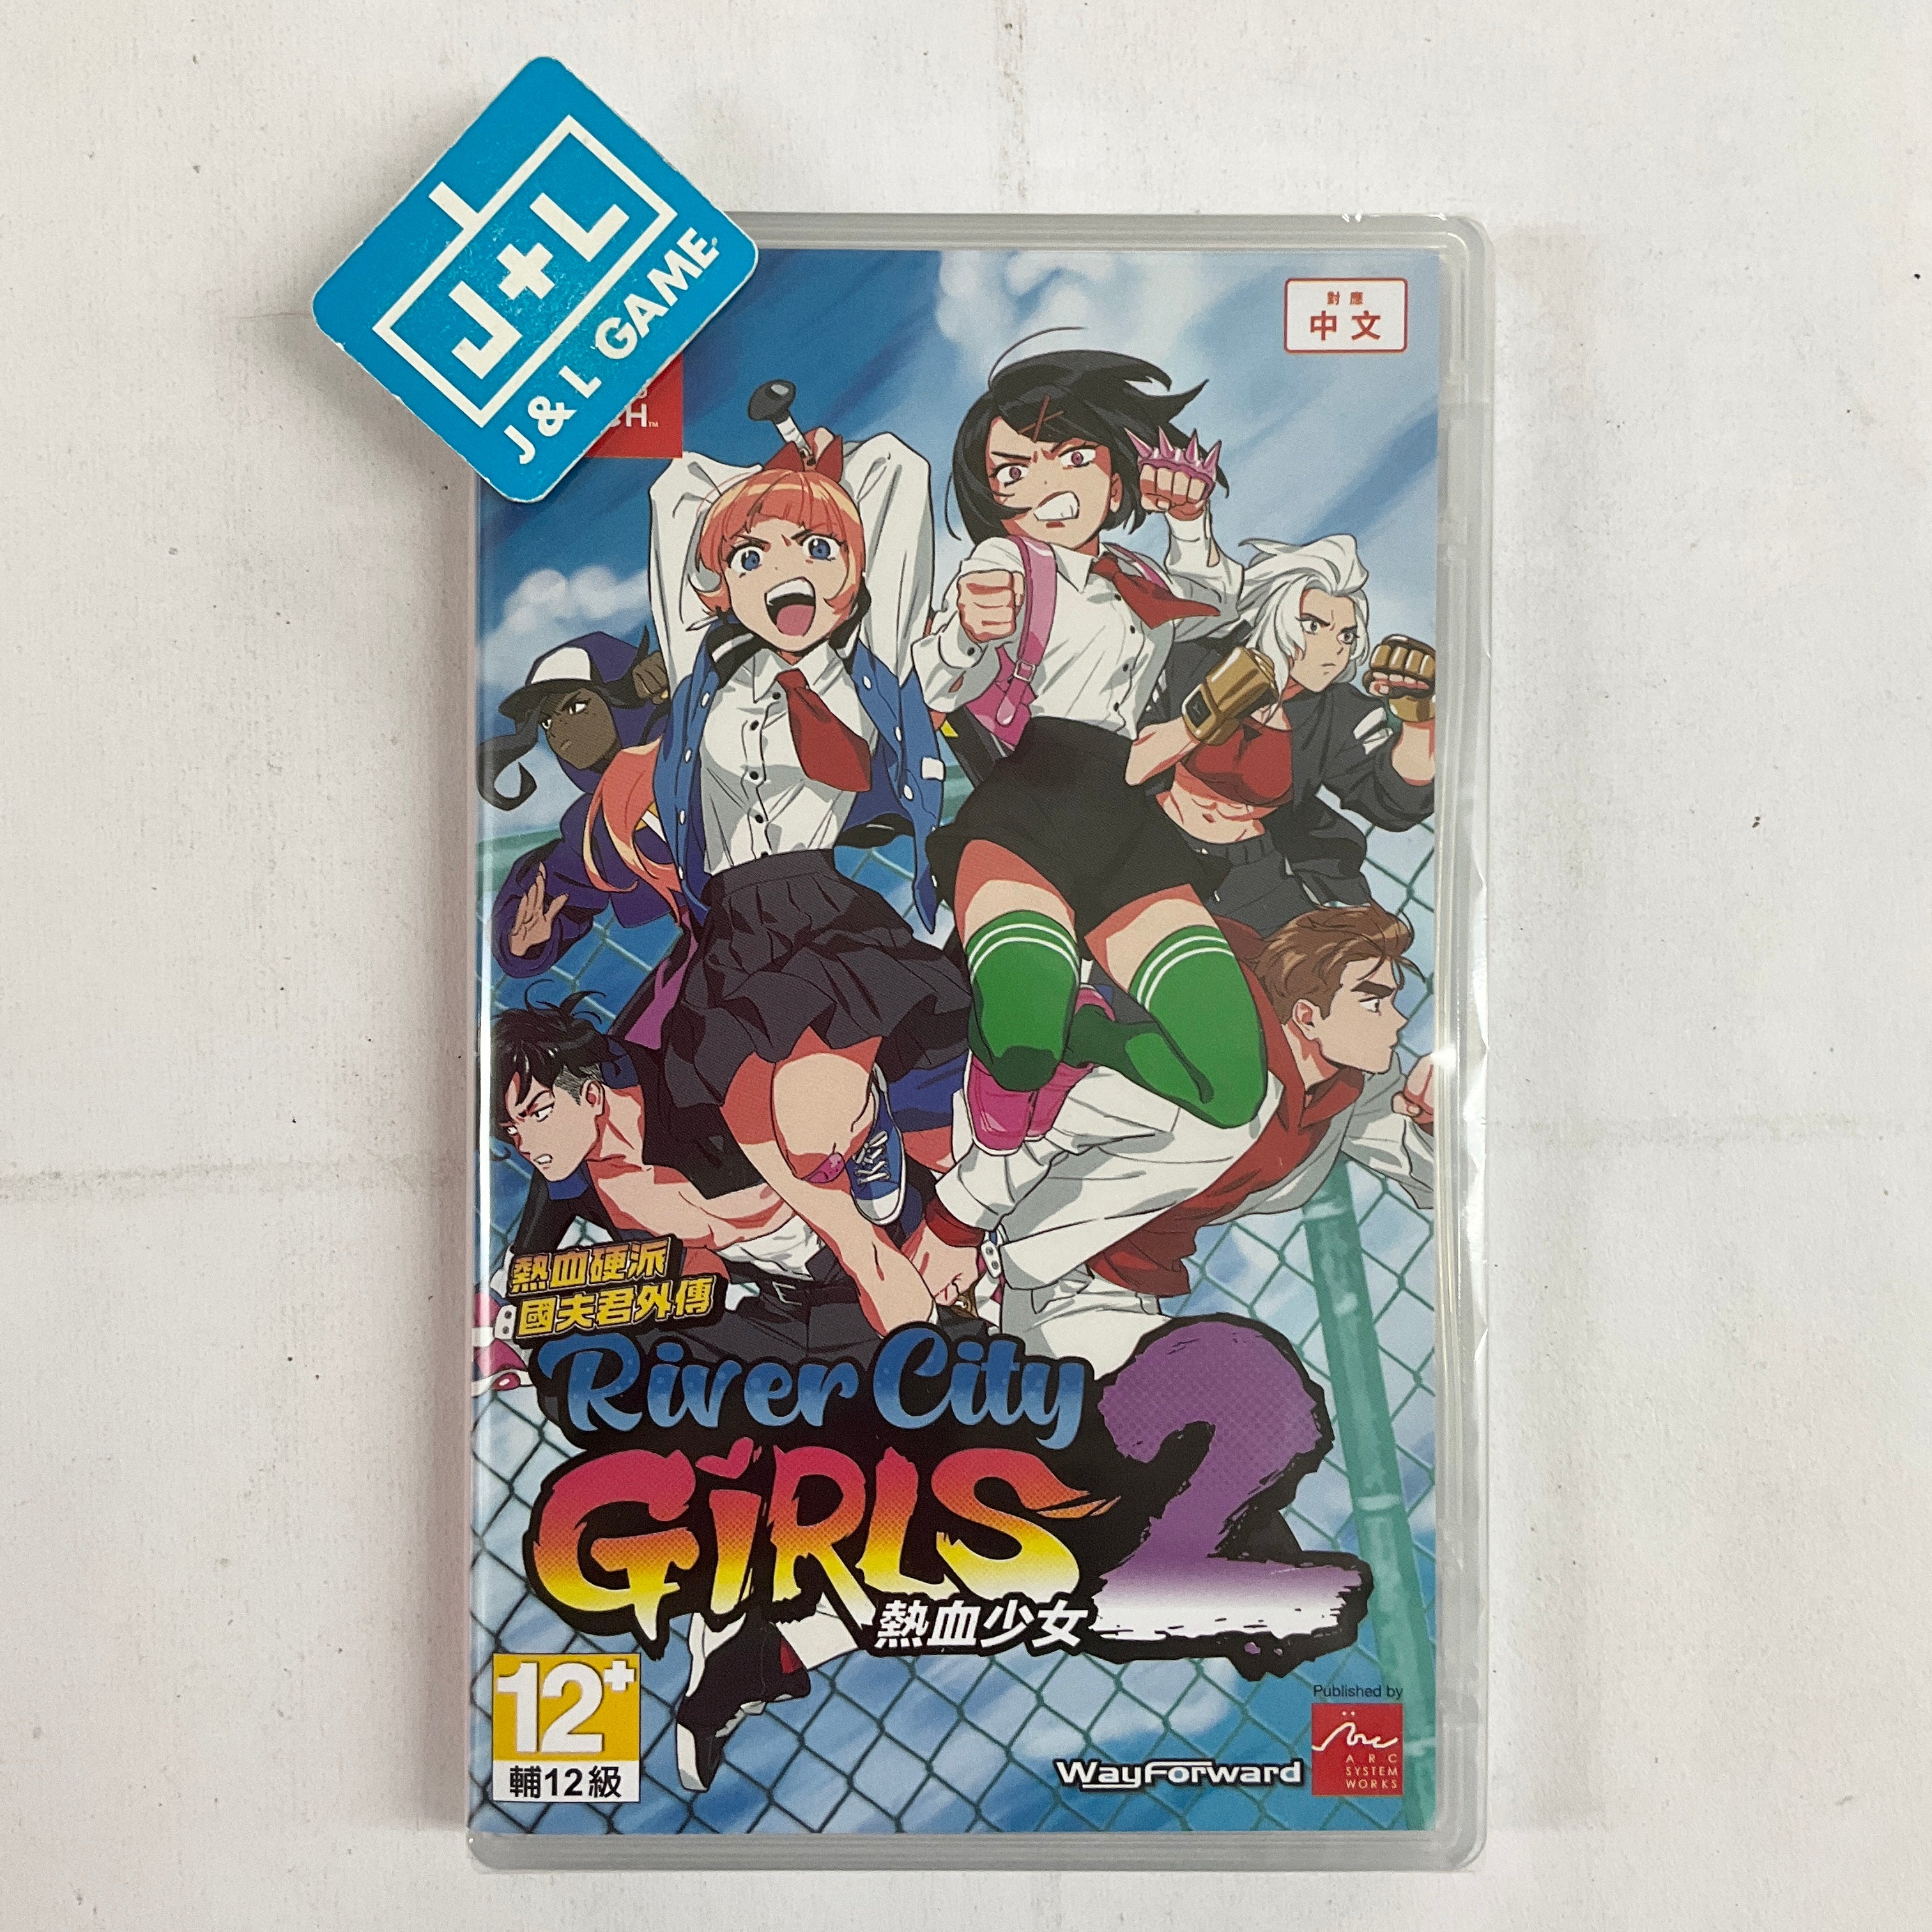 River City Girls 2 (English Subtitles) - (NSW) Nintendo Switch (Asia Import) Video Games Arc System Works   